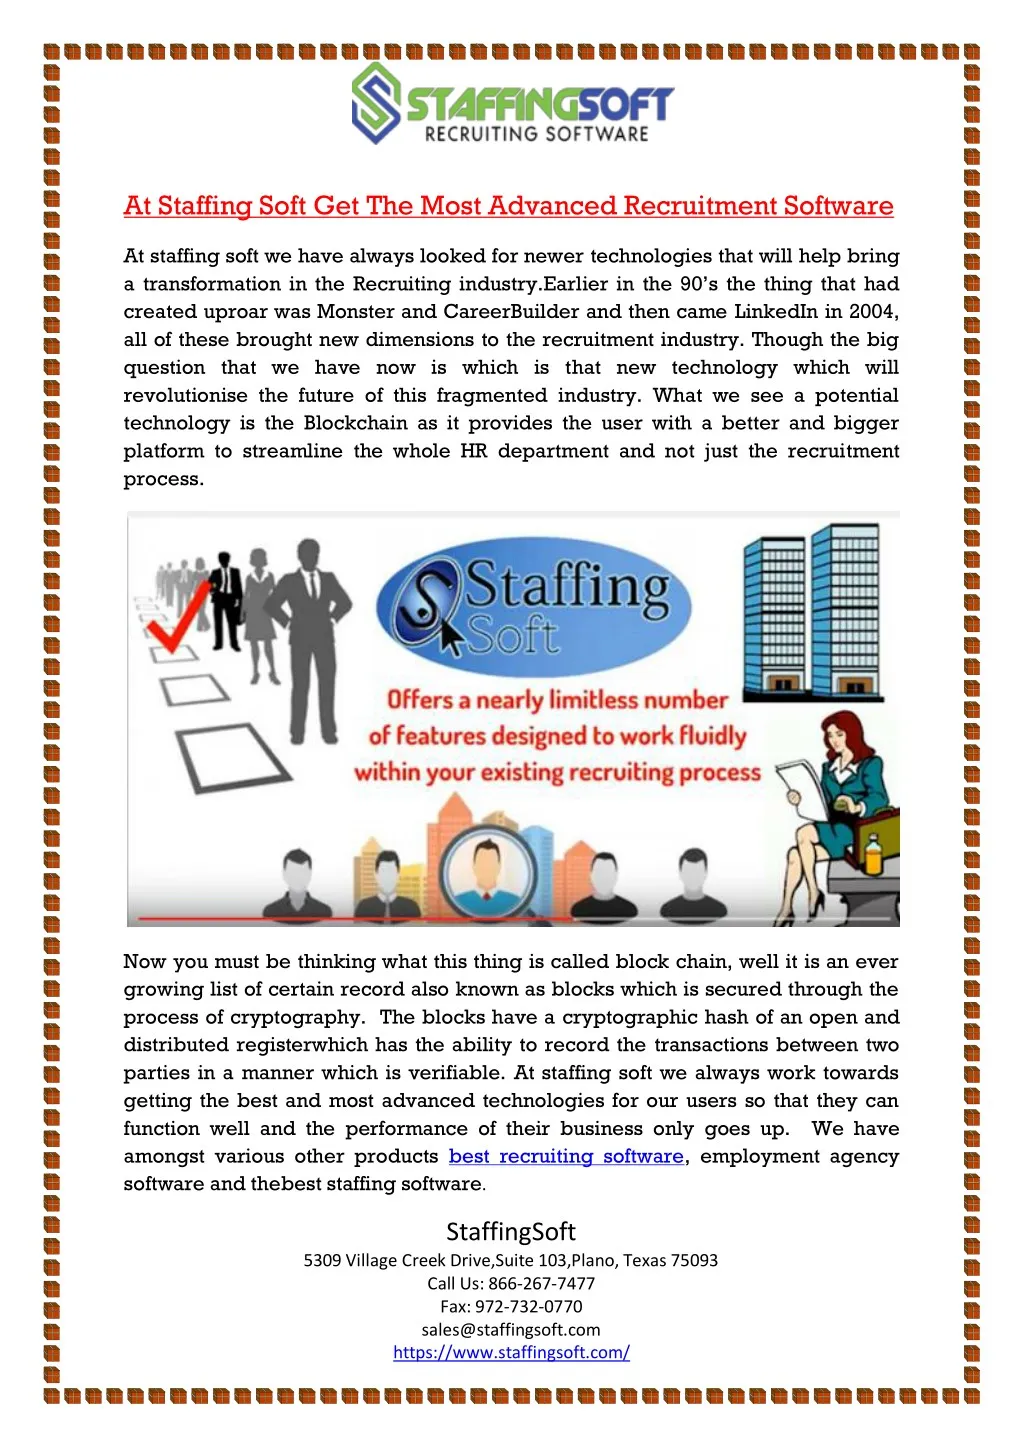 at staffing soft get the most advanced